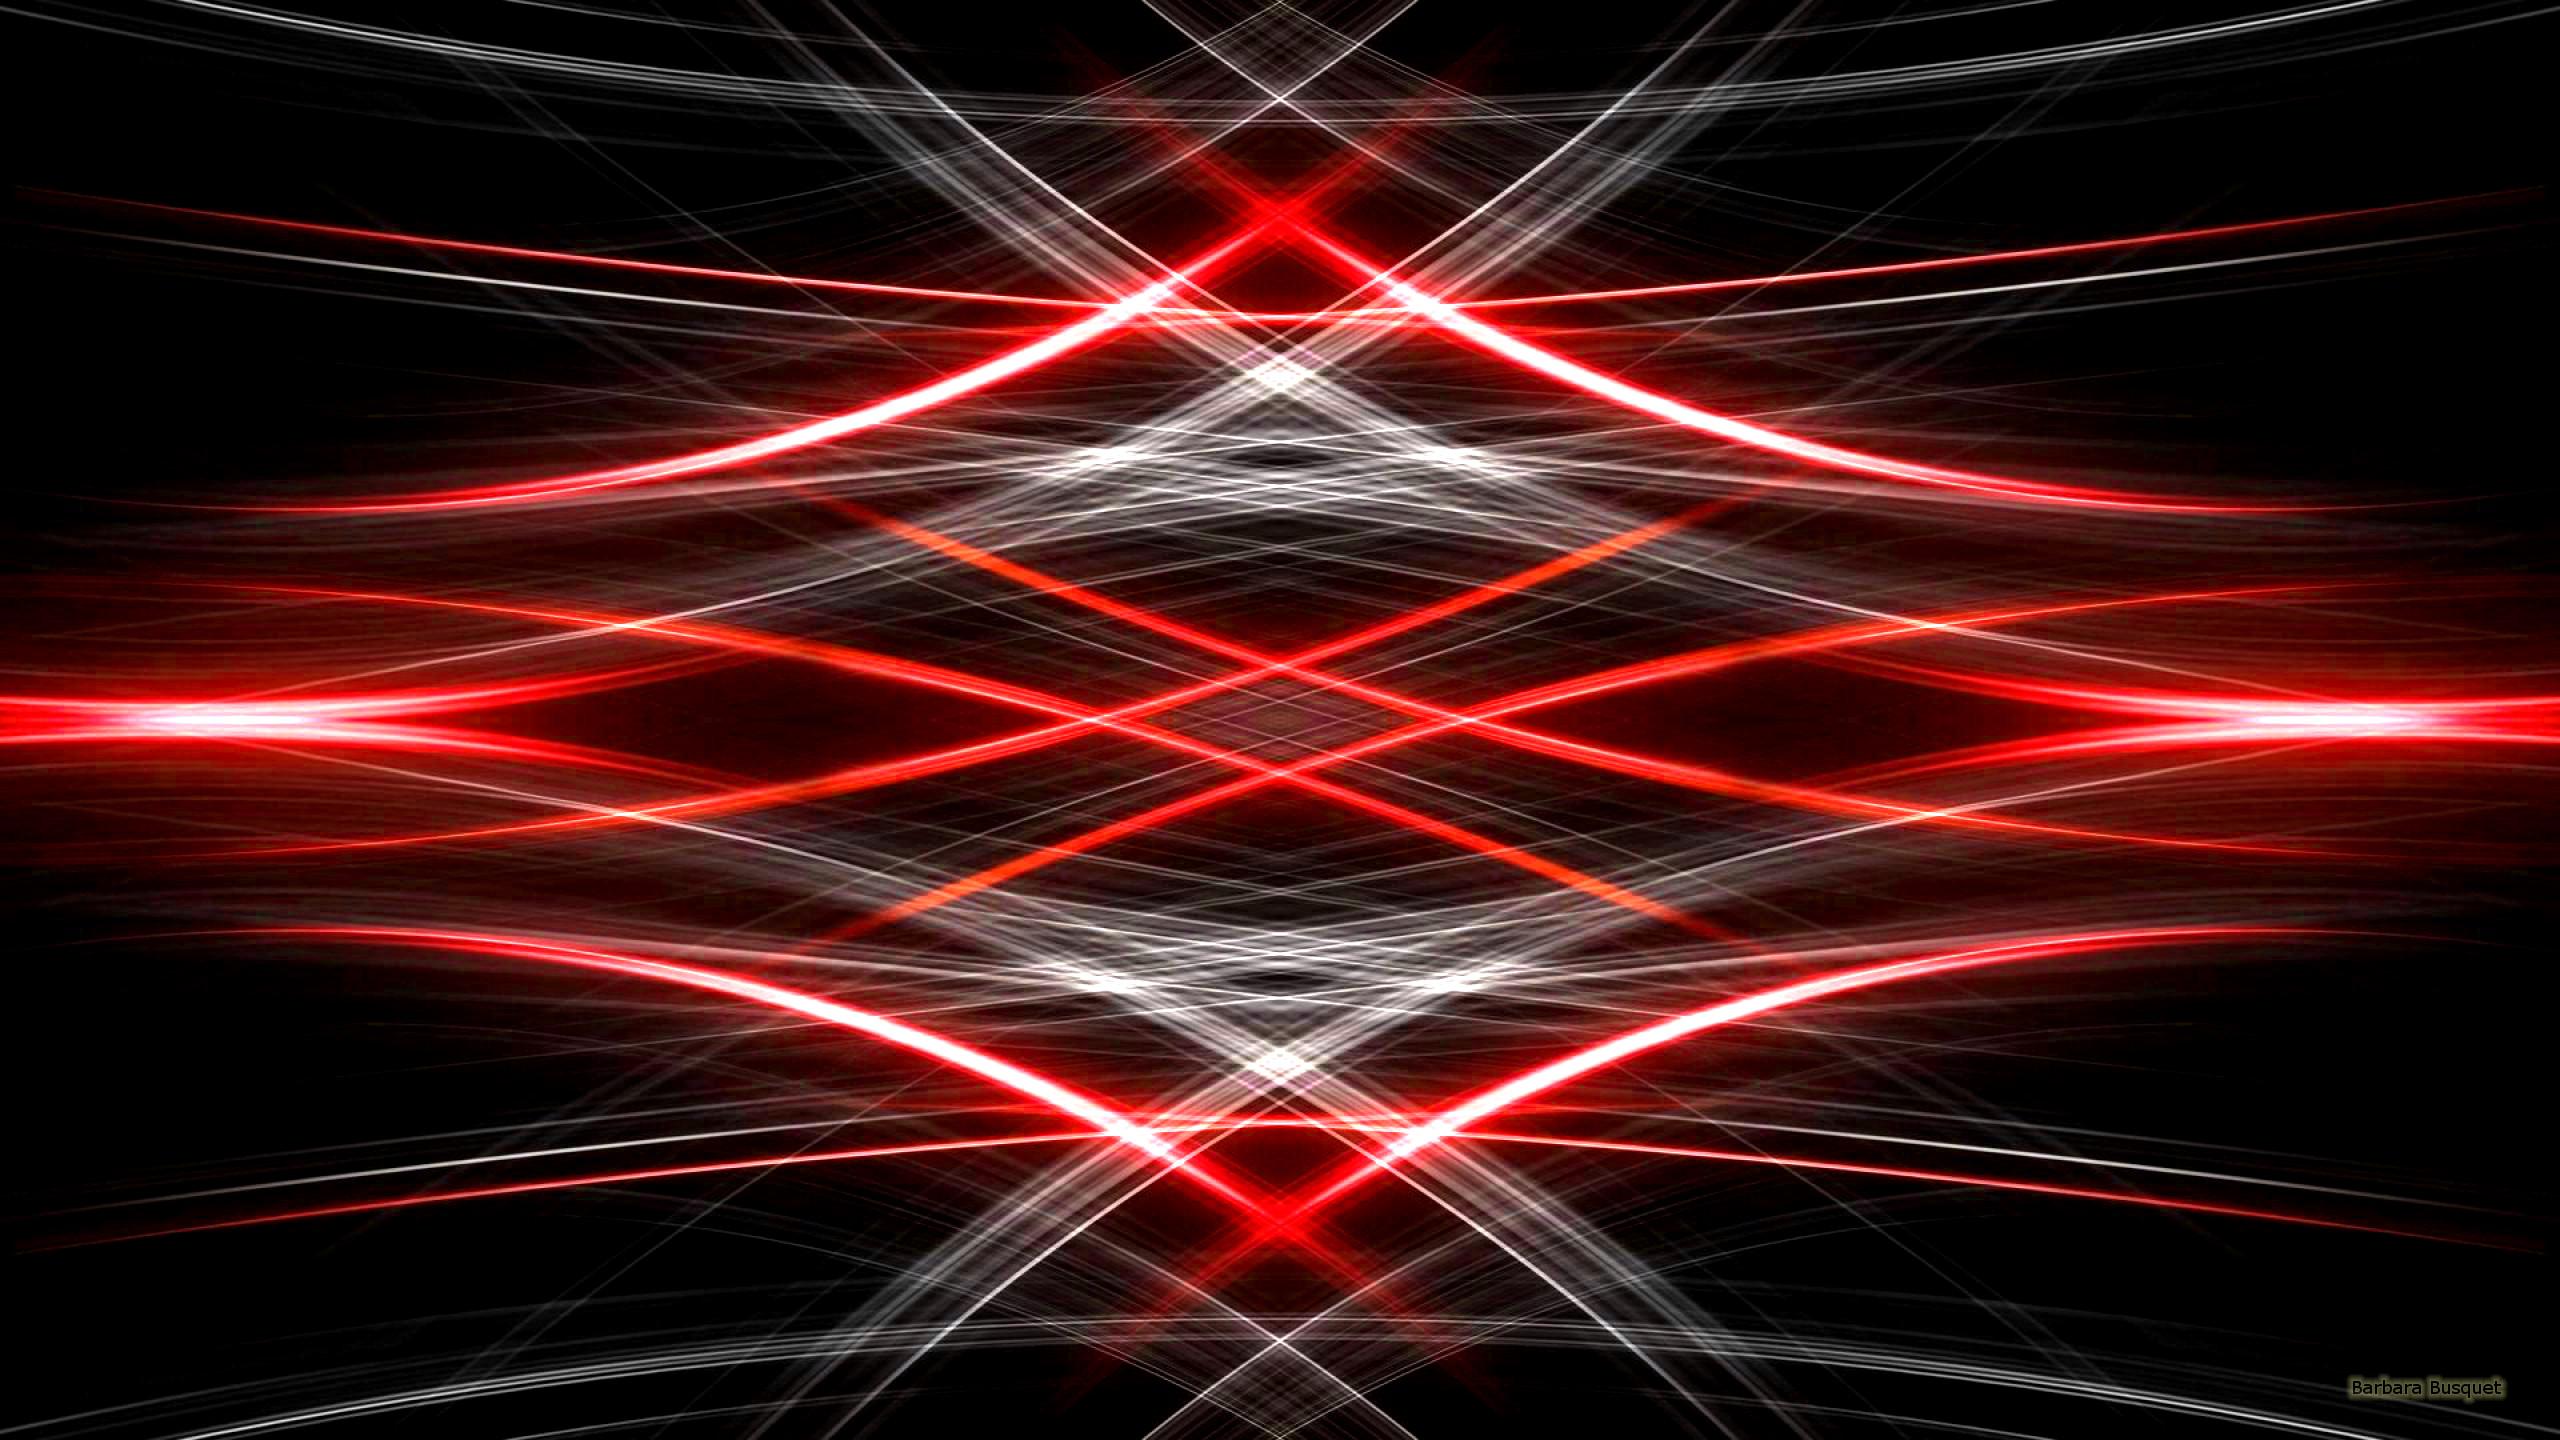 2560 X 1440 Red Abstract Wallpapers - Top Free 2560 X 1440 Red Abstract ...